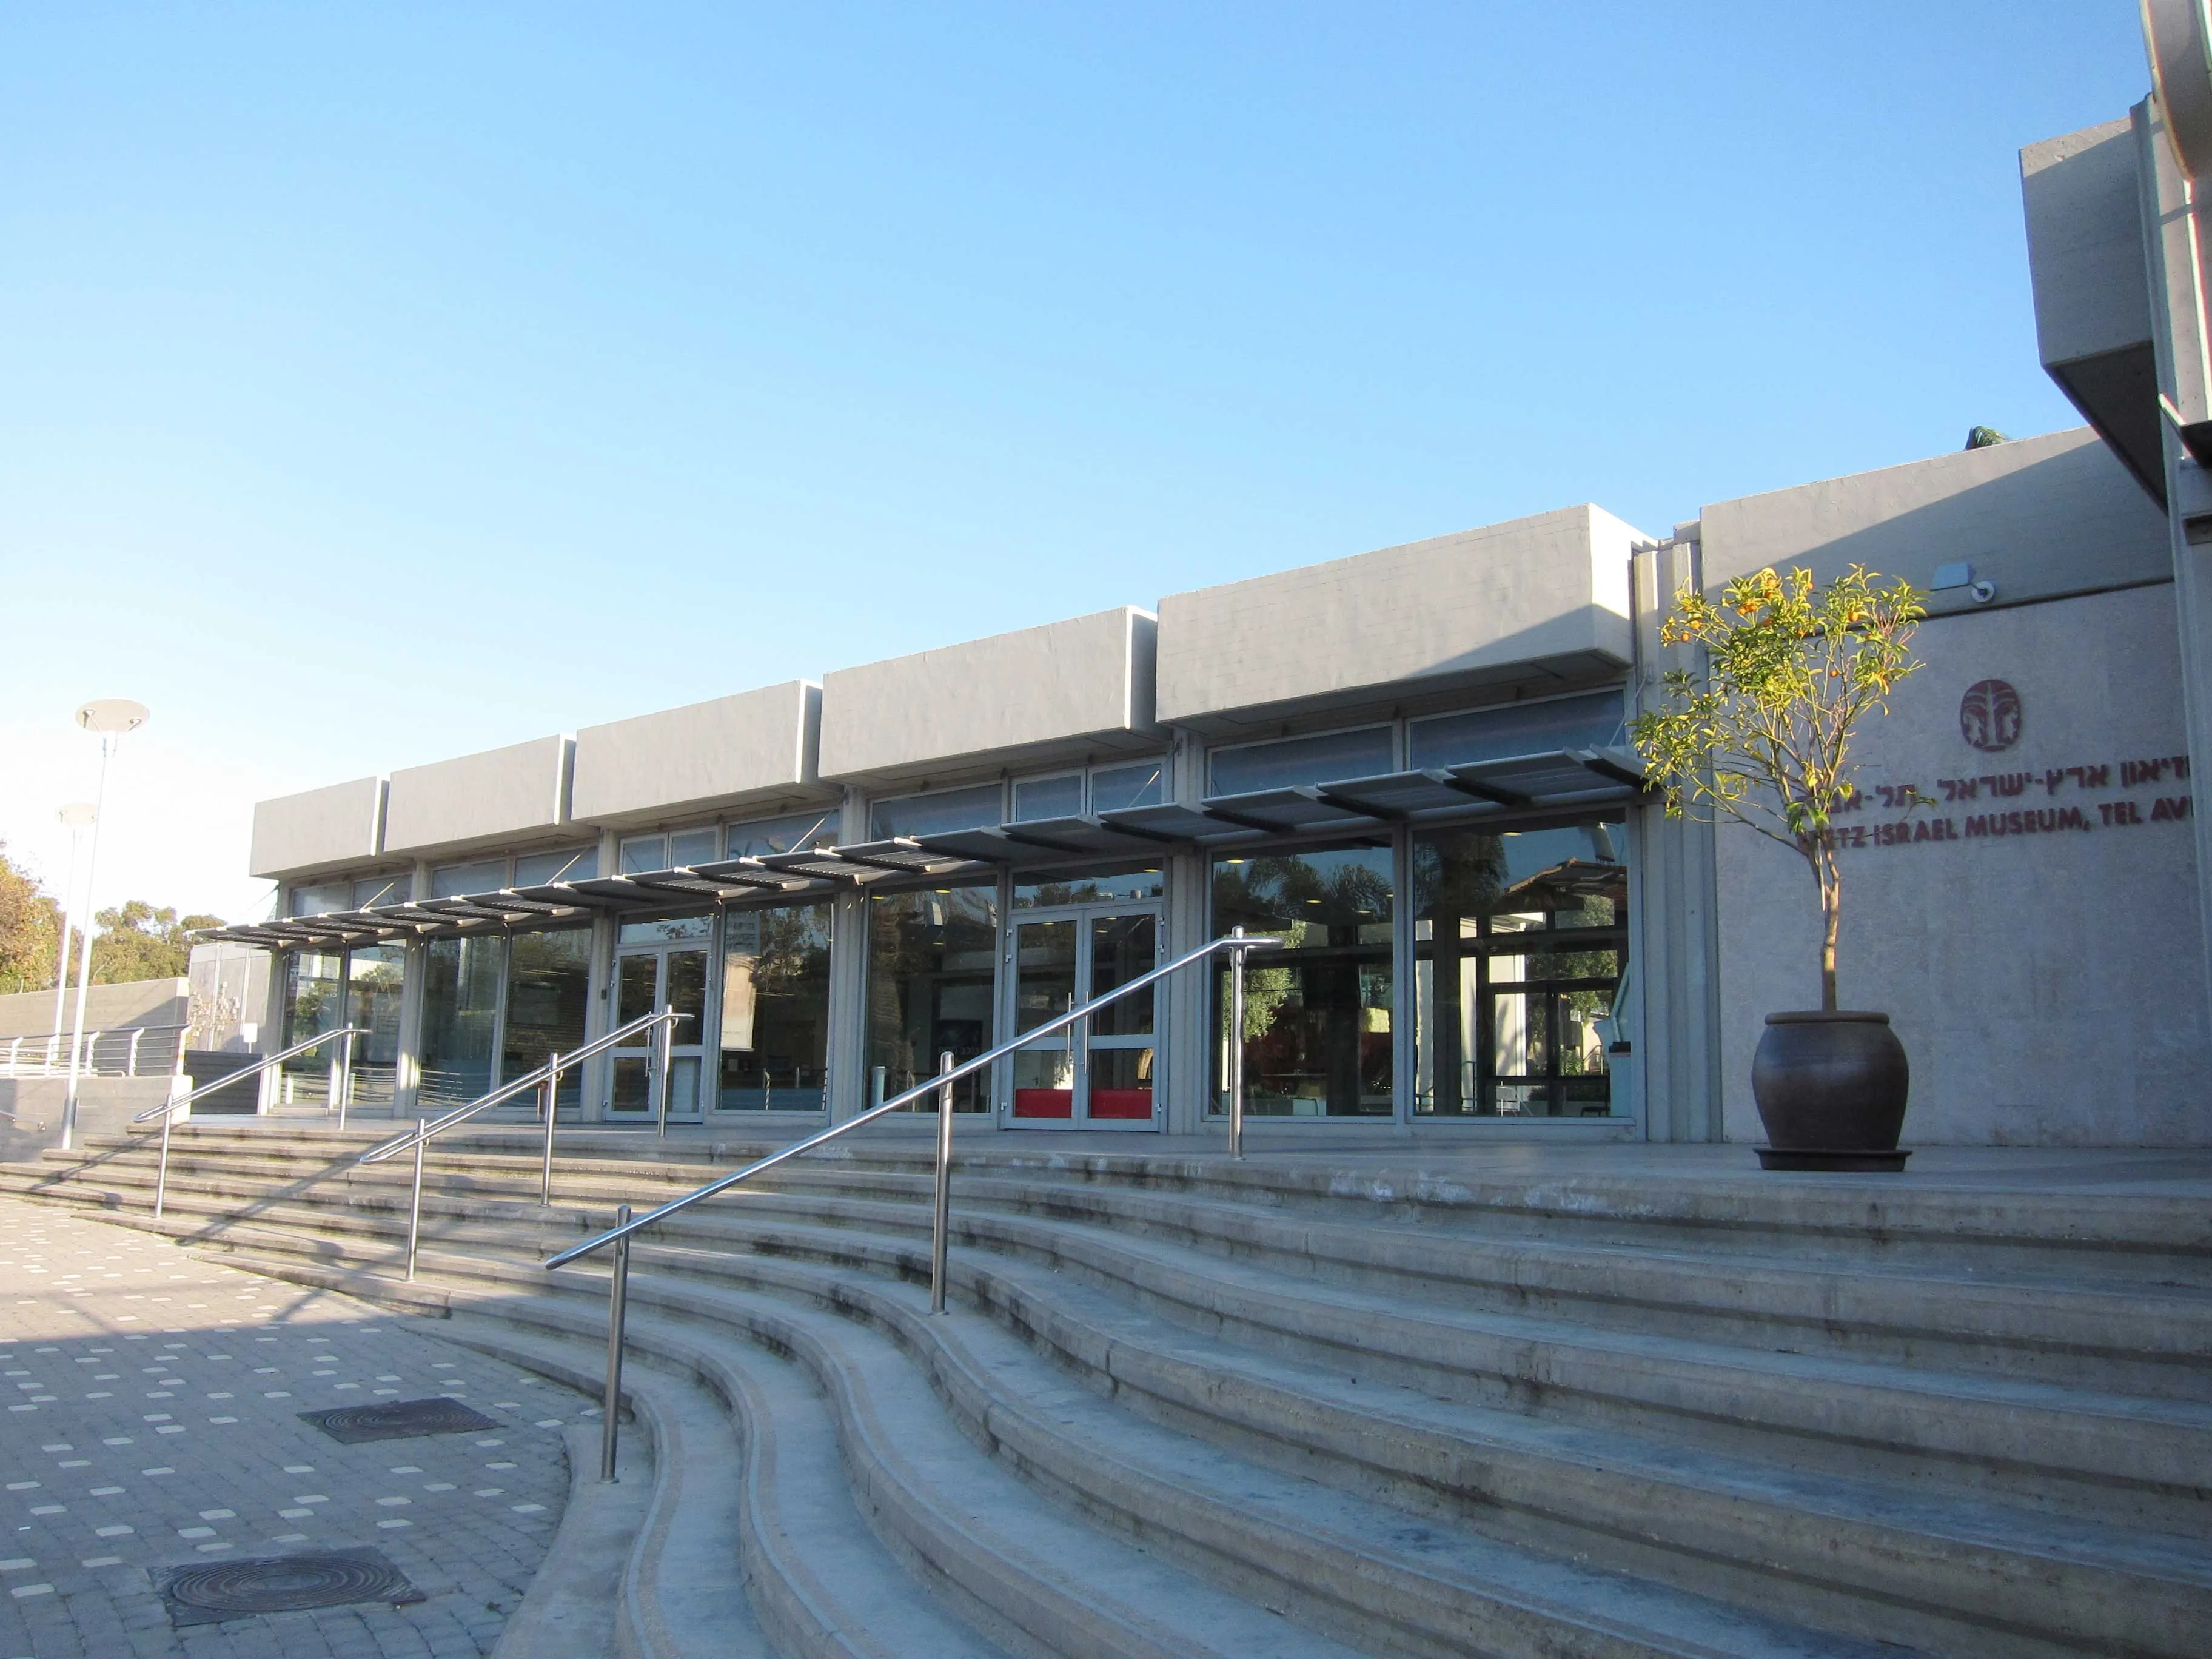 Eretz Israel Museum in Israel, Middle East | Museums - Rated 3.7